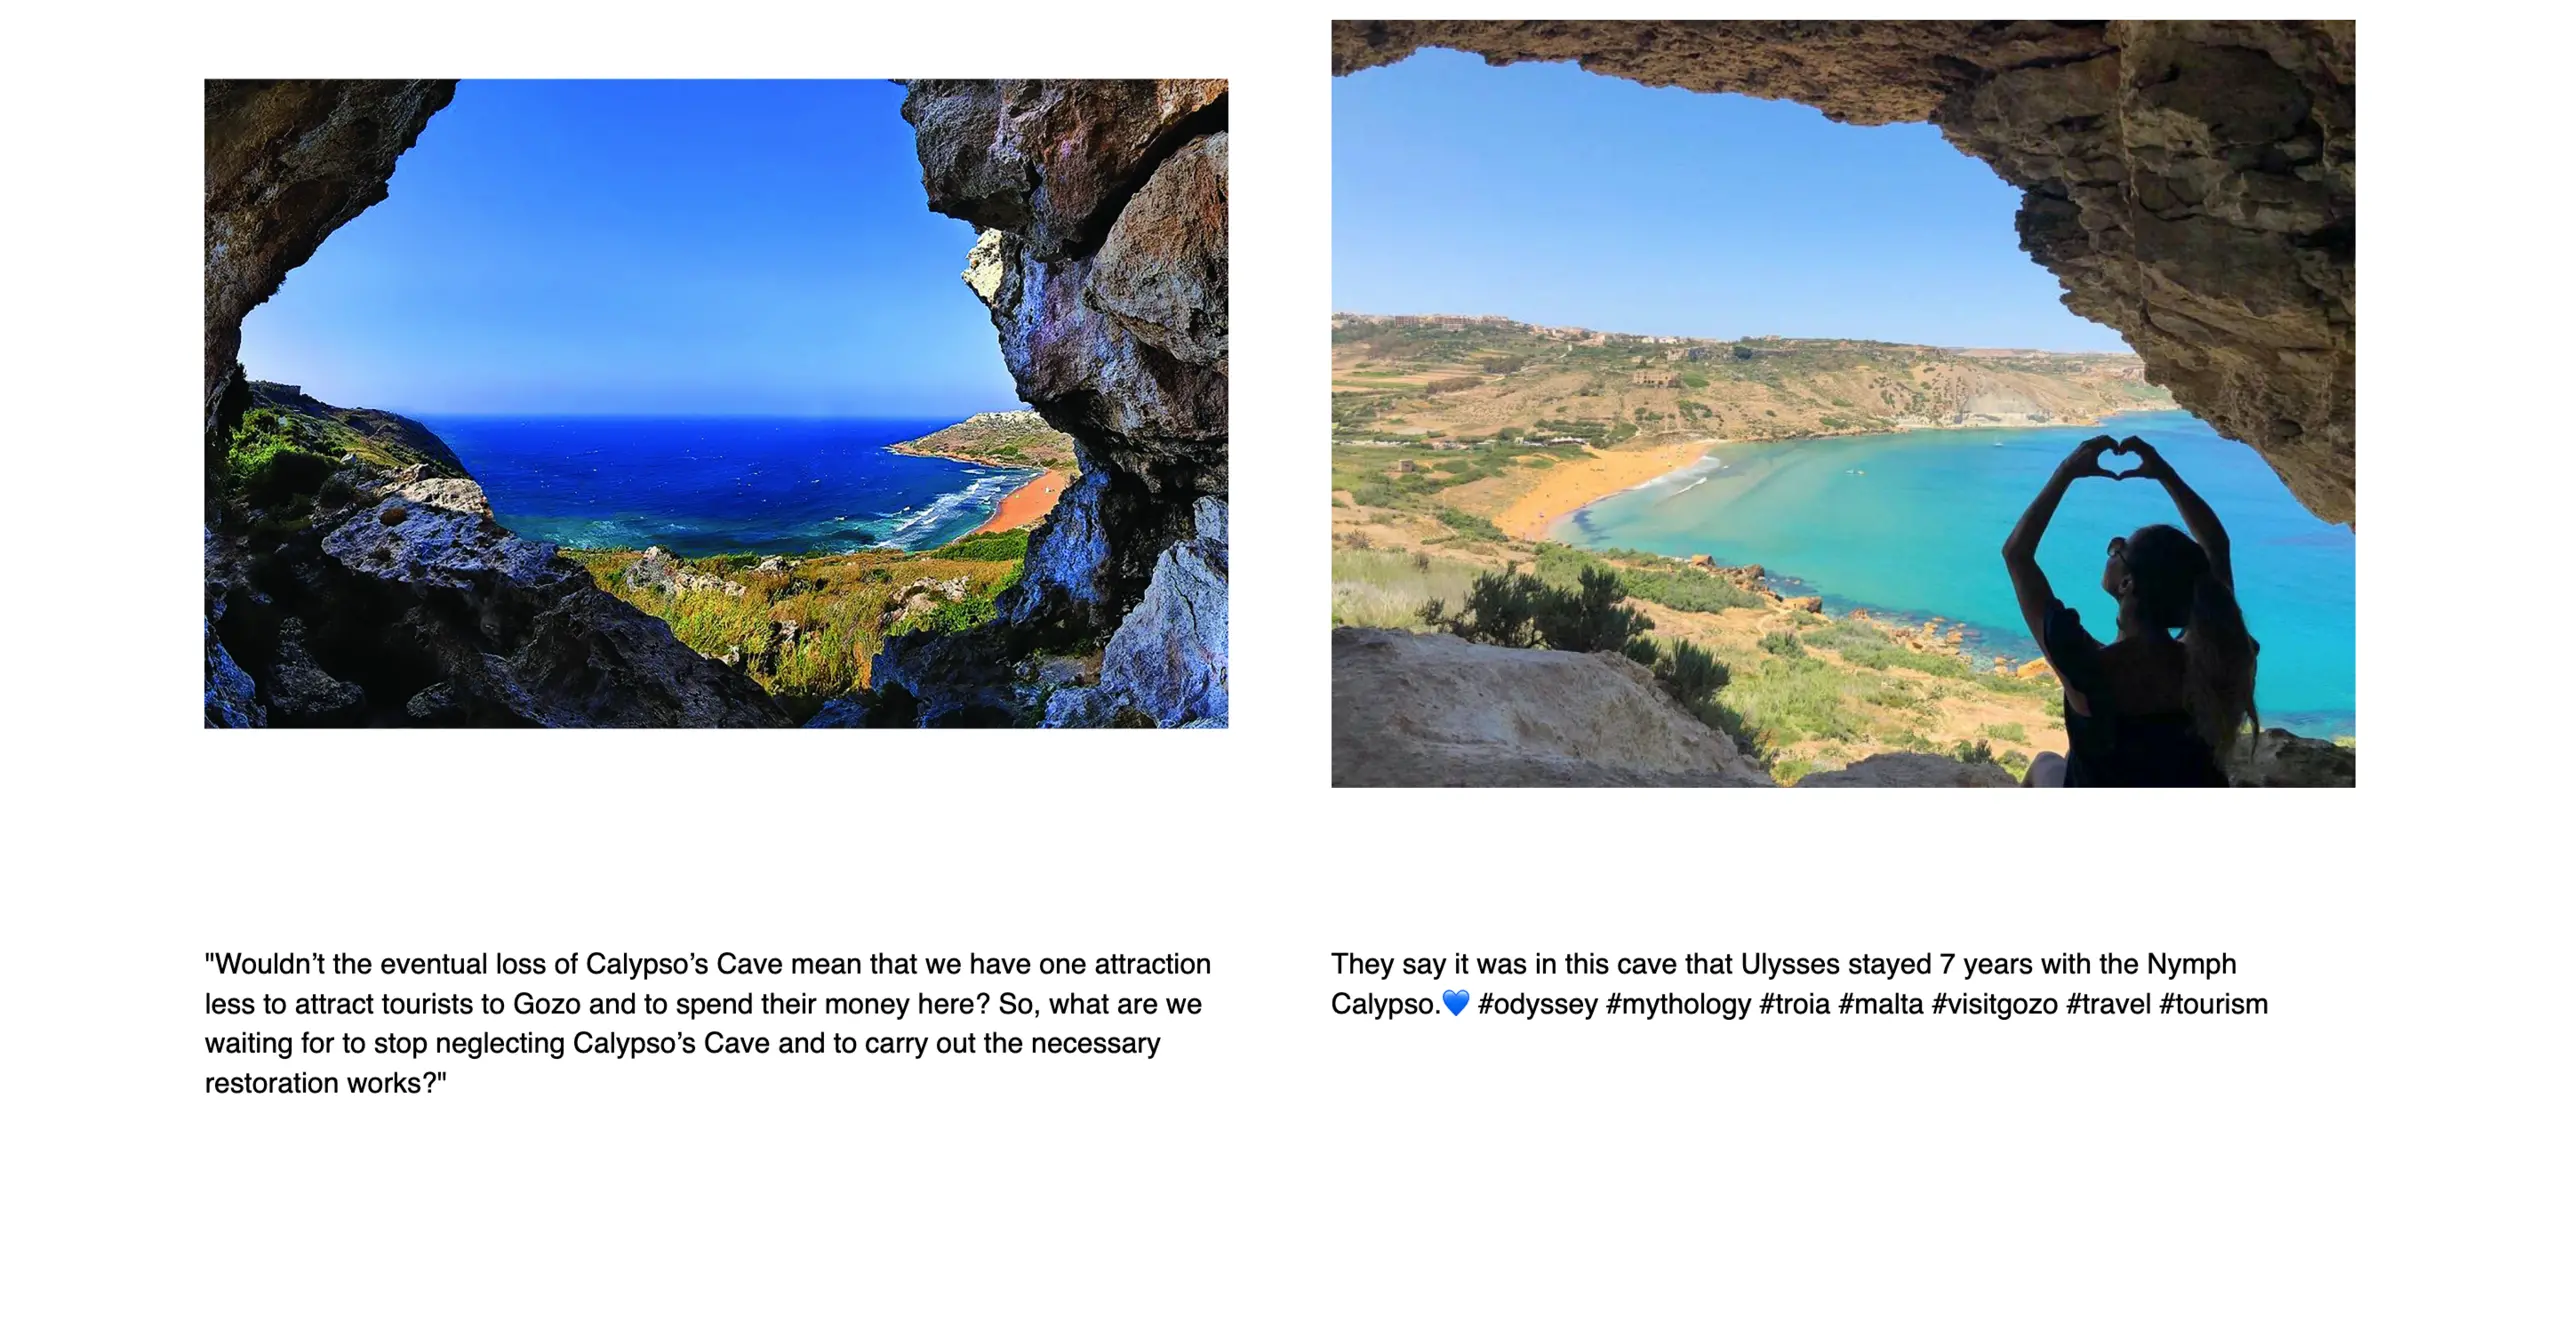 Two landscape photographs of beaches taken from the entrance of a cave. The images are over a white background side by side. Each photograph is accompanied by a caption referring to the Calypso cave.